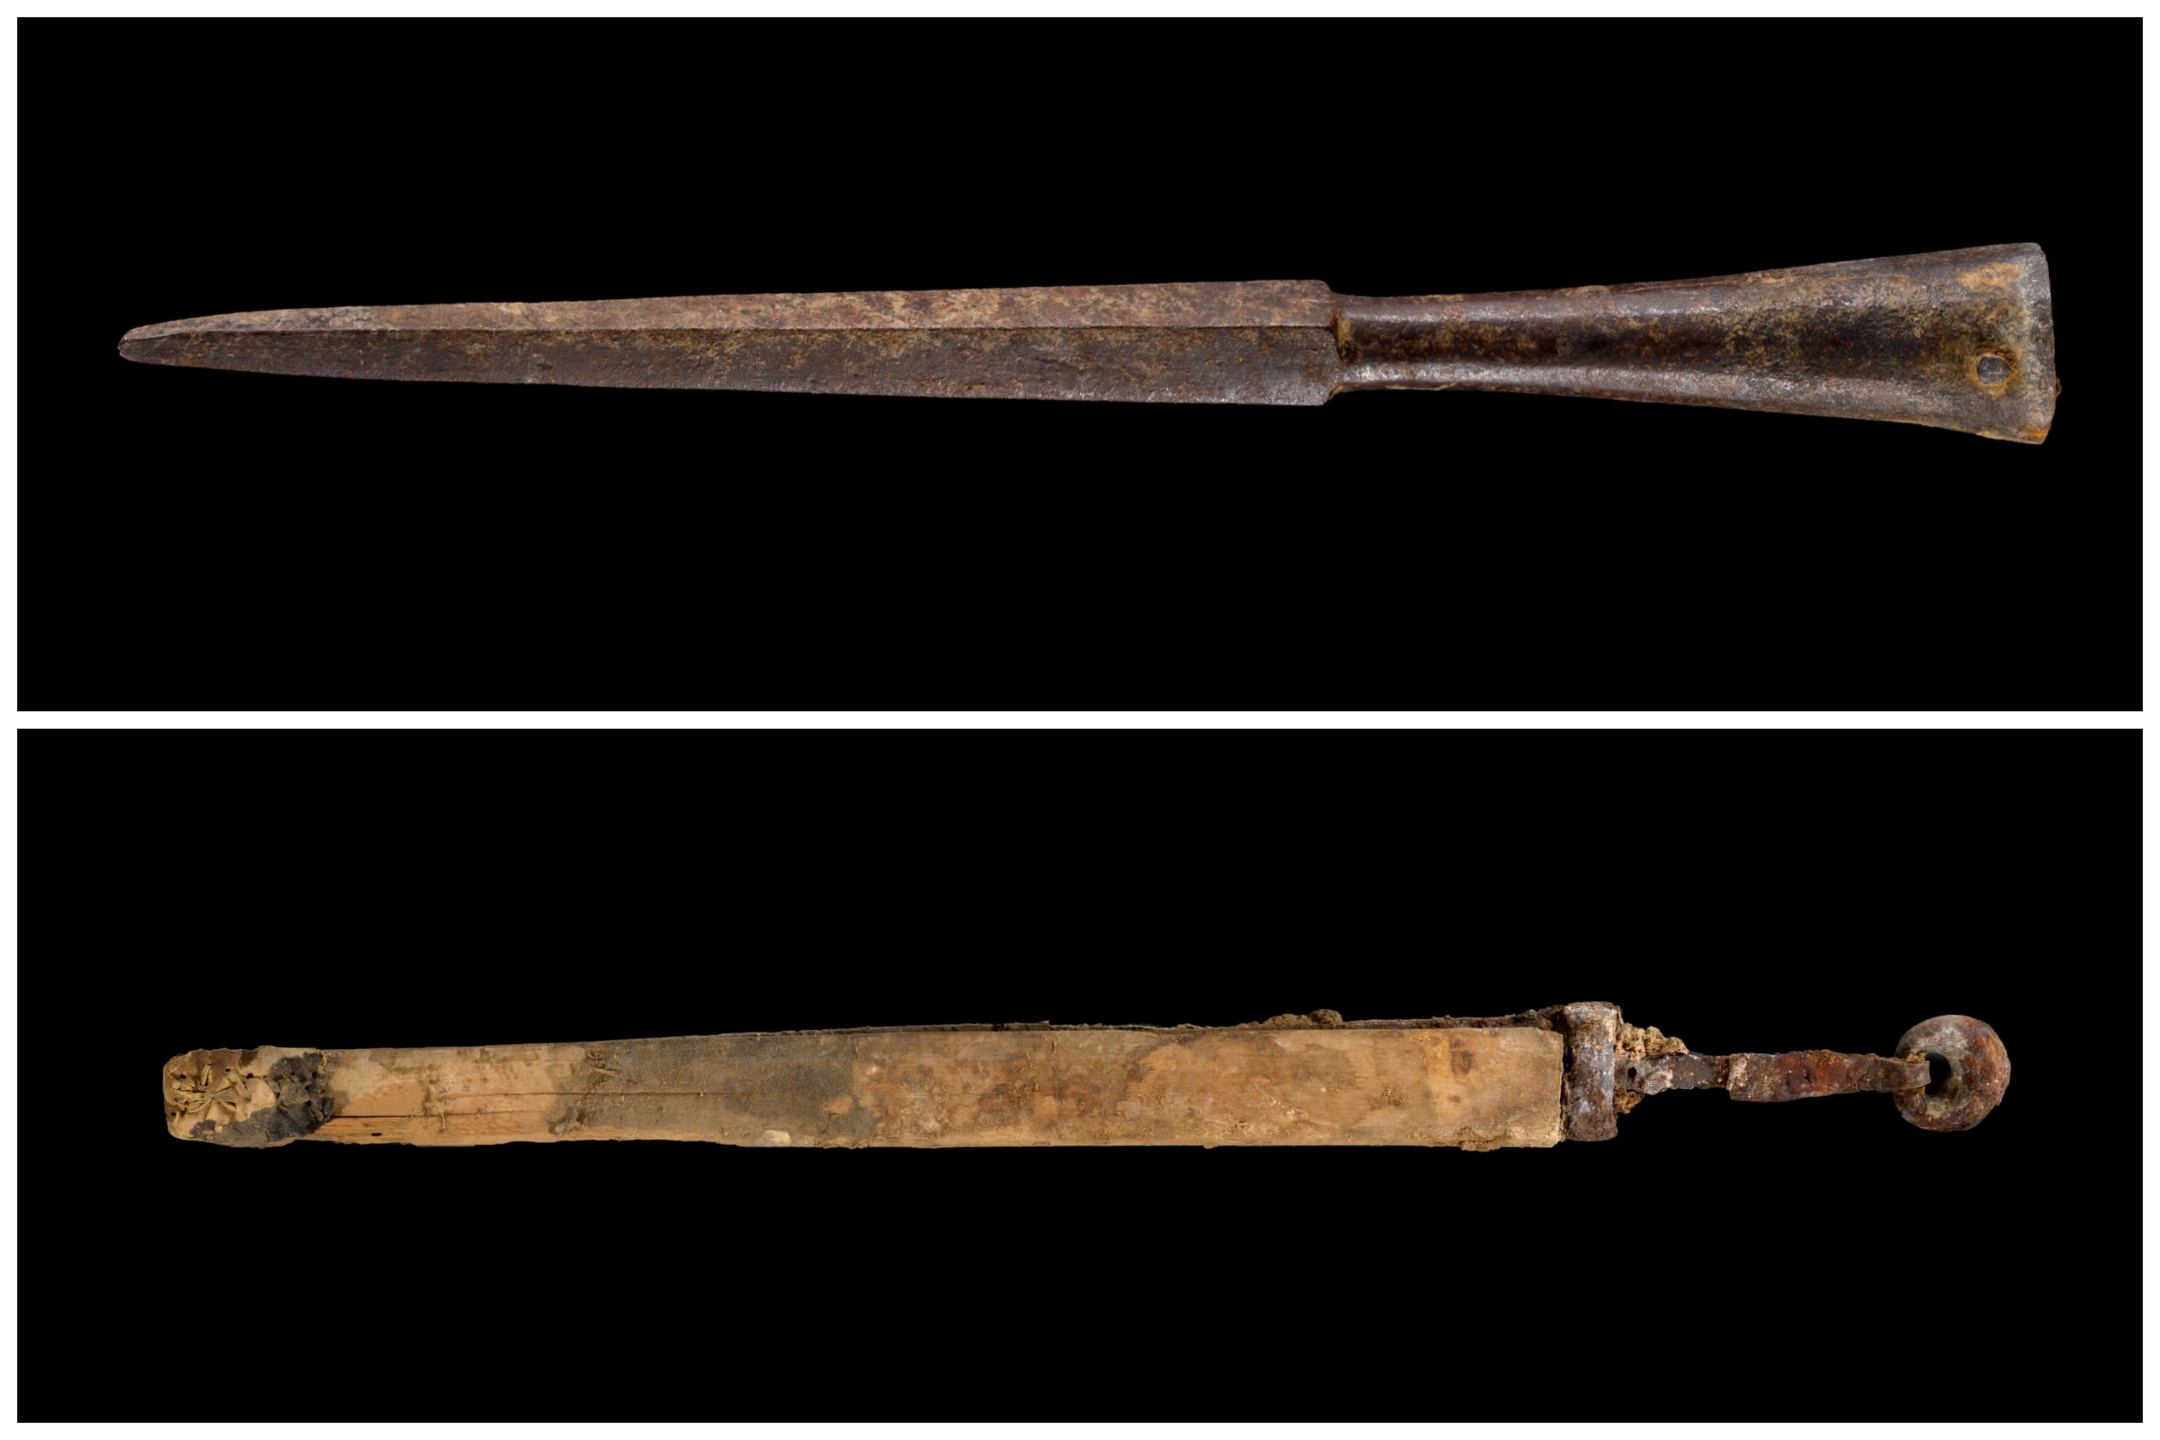 rare-ancient-roman-swords-from-1-900-years-ago-found-in-desert-cave